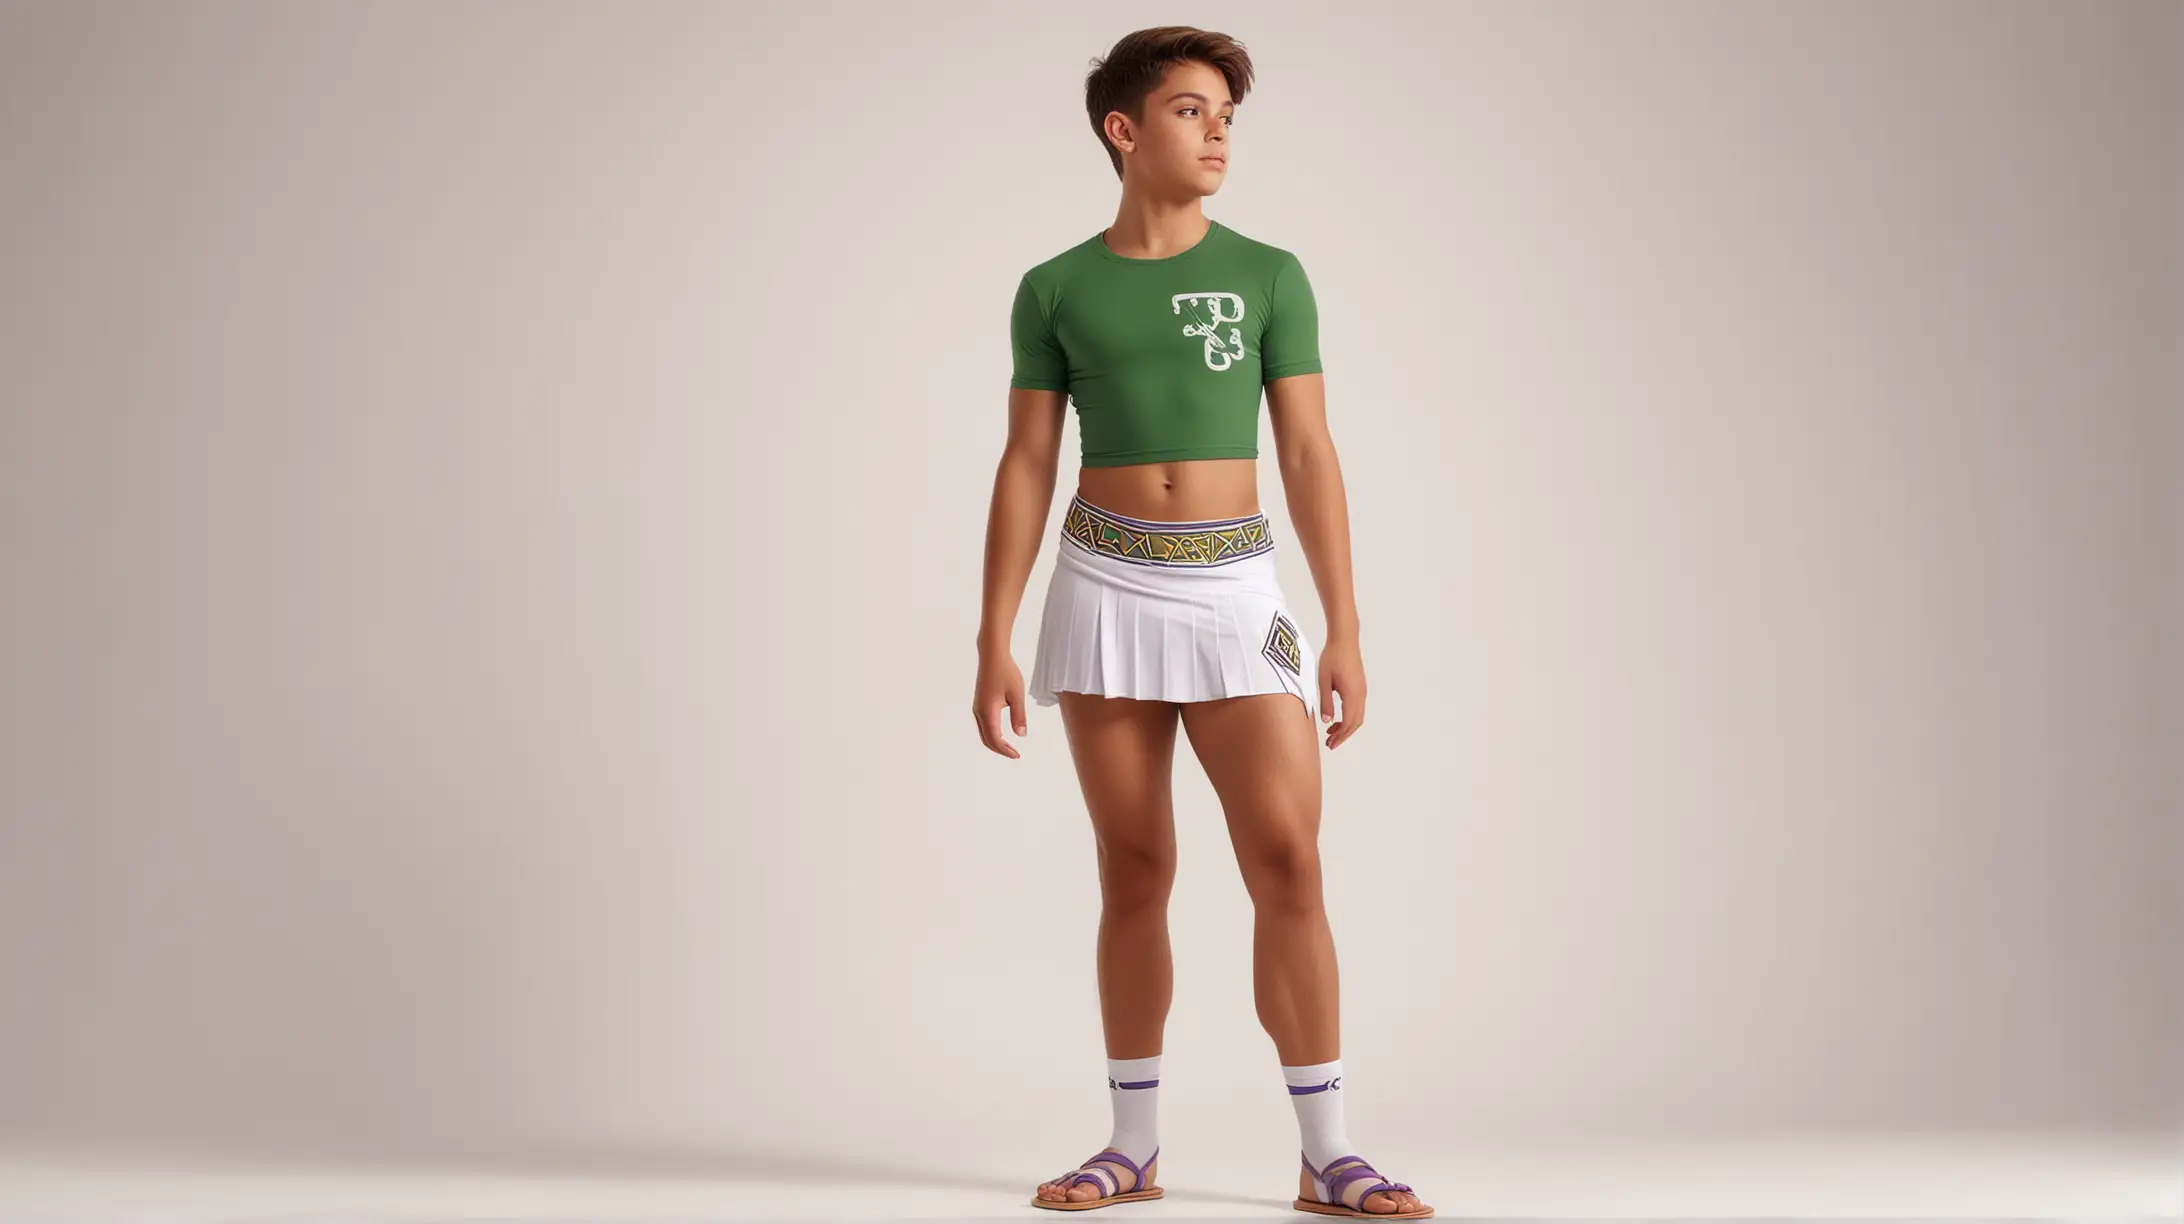 no background, photo realistic, white background, cute tanned  boyish 18-year old boy, wearing short micro-miniskirt, cropped lycra skintight muscle t-shirt, with Greek lambda symbol, Greek sandals, purple and green color scheme